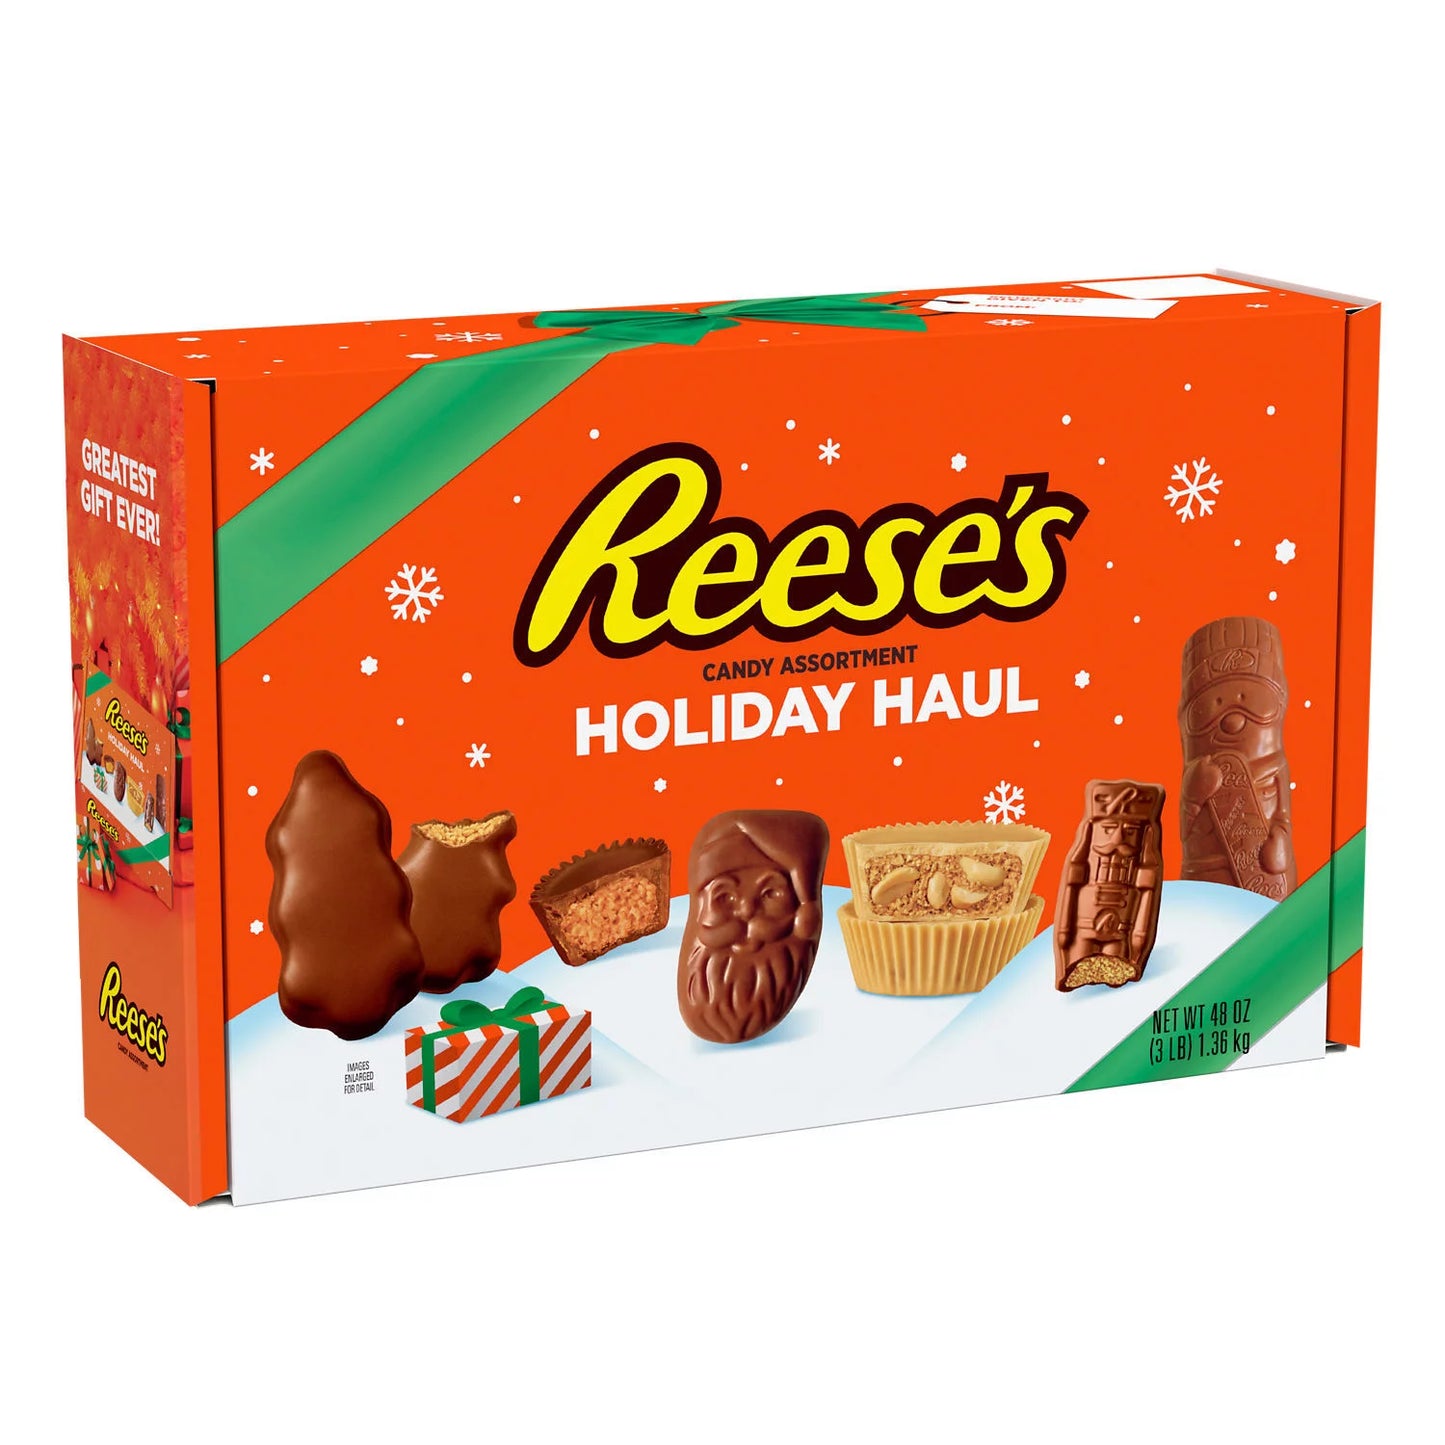 REESE'S, Milk Chocolate Peanut Butter Assortment Candy, Christmas Gift - Ultimate Collection, 48 oz, Gift Box 3 Lbs